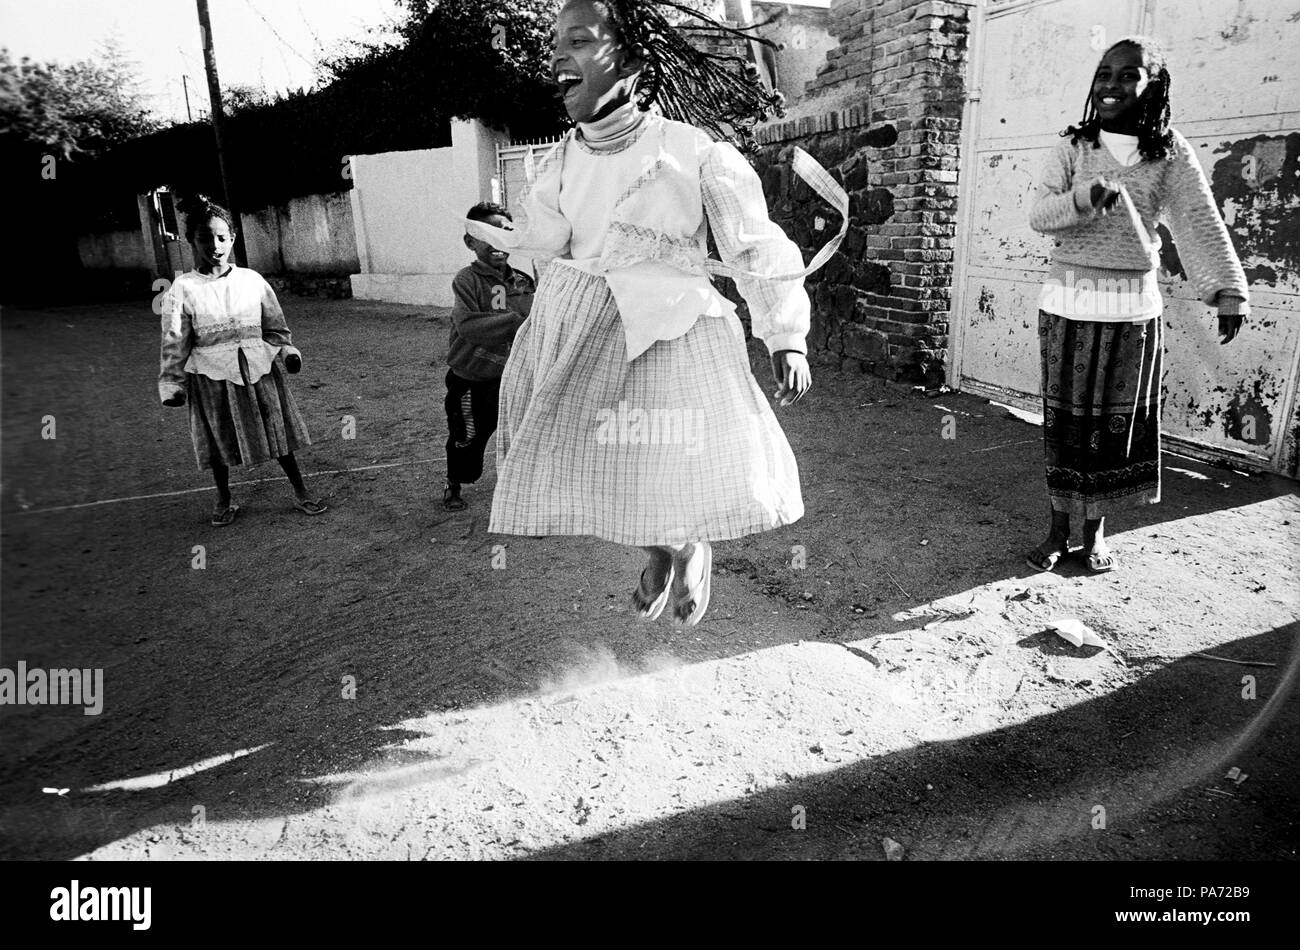 Asmara, Eritrea, Eritrea. 2nd Nov, 1999. An Eritrean girl jumps rope in a street in the capital, Asmara. The daily life in the city continues while war wages on the border 60 miles away. Credit: Cheryl Hatch/ZUMAPRESS.com/Alamy Live News Stock Photo